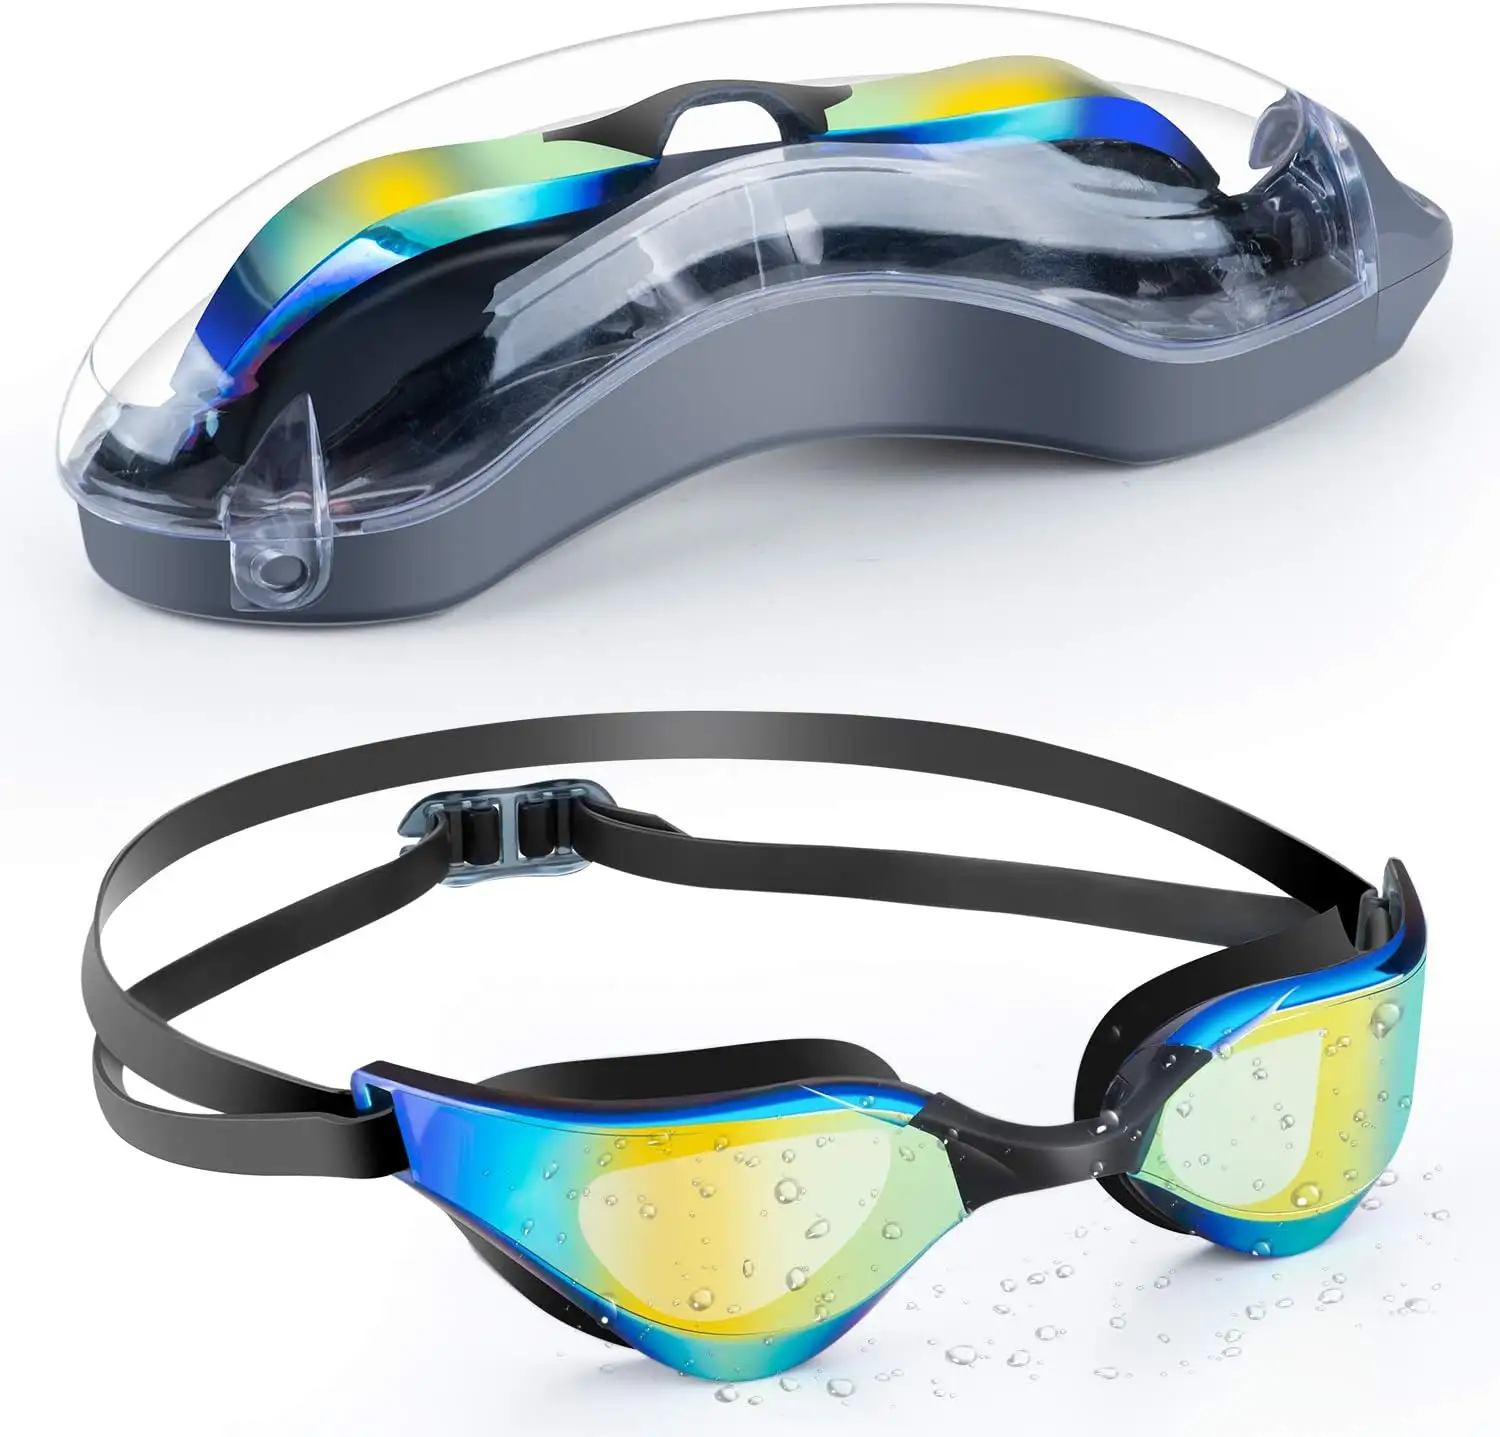 New Arrivals UV Protect Comfortable Waterproof HD Lens Adjustable Silicone Swim Goggles For Men Women Adults